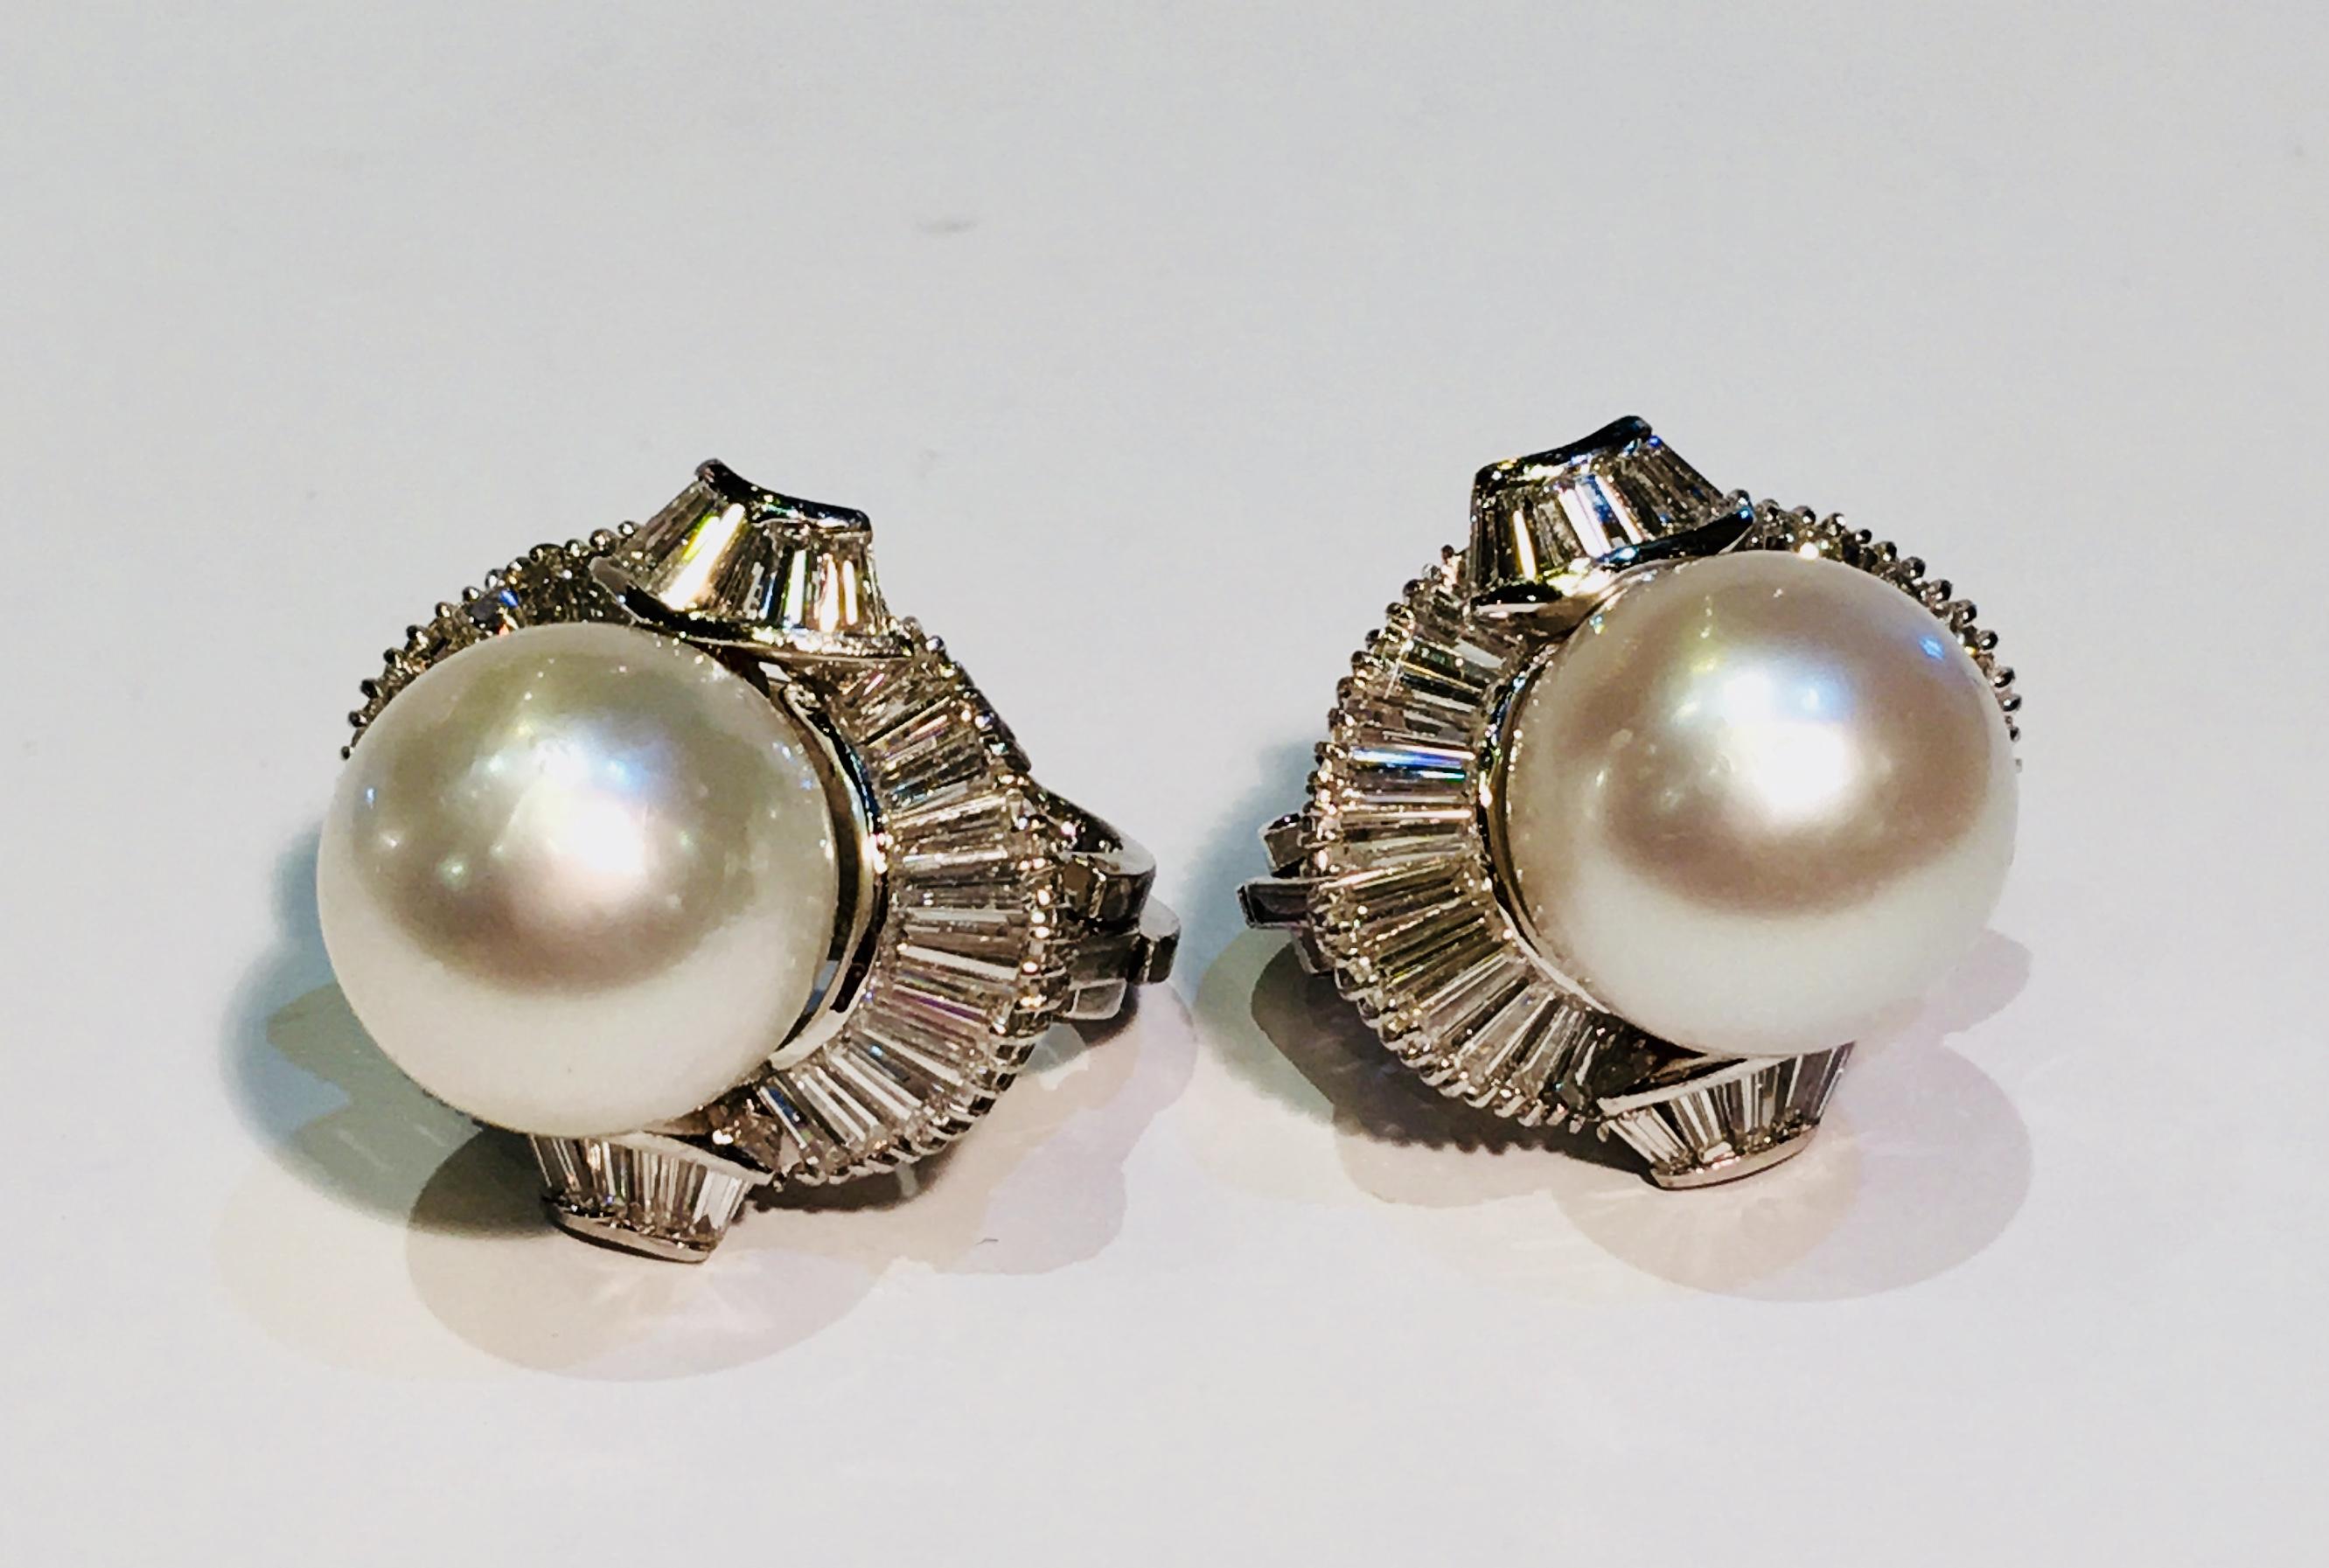 4.5 carats of white diamond baguettes surrounding large round white South Sea pearls, set in 18 karat white gold in these gorgeous, traditional omega back earrings.

Pearls are well matched, measure 12.5 mm each and have a great luster.

30 tapered